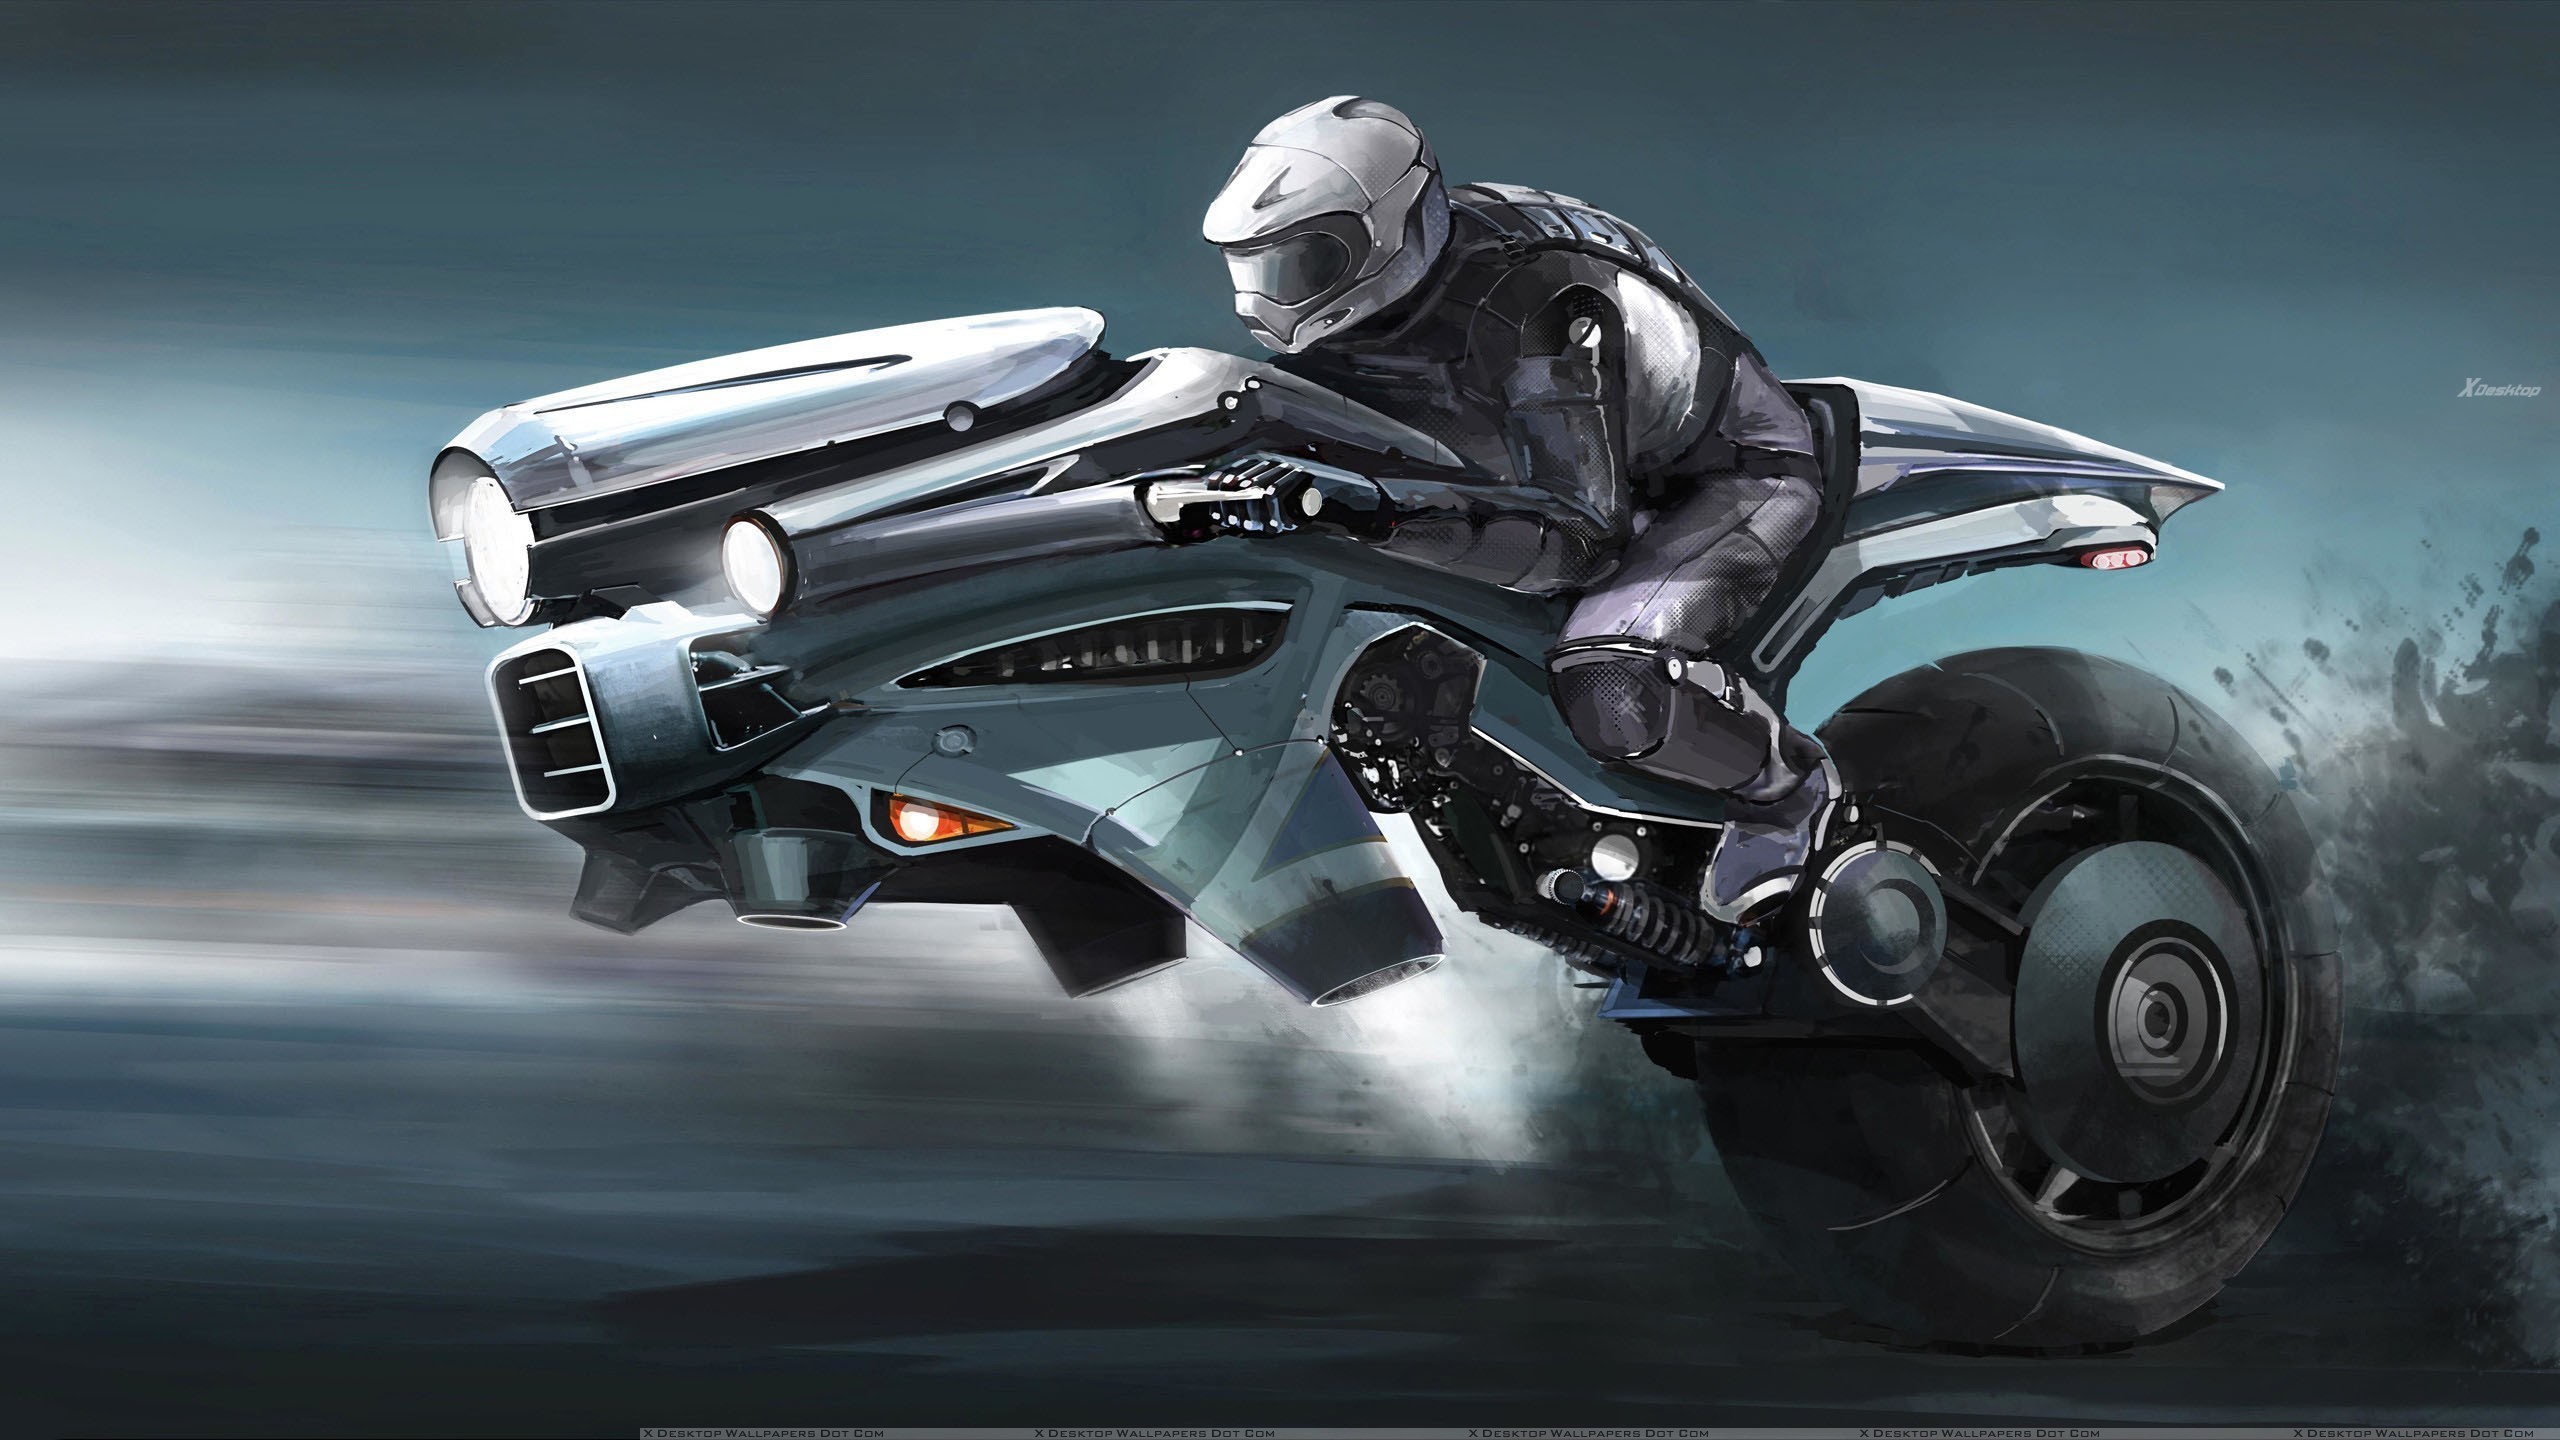 Concept Bikes Wallpapers Photos Images in HD 2560x1440